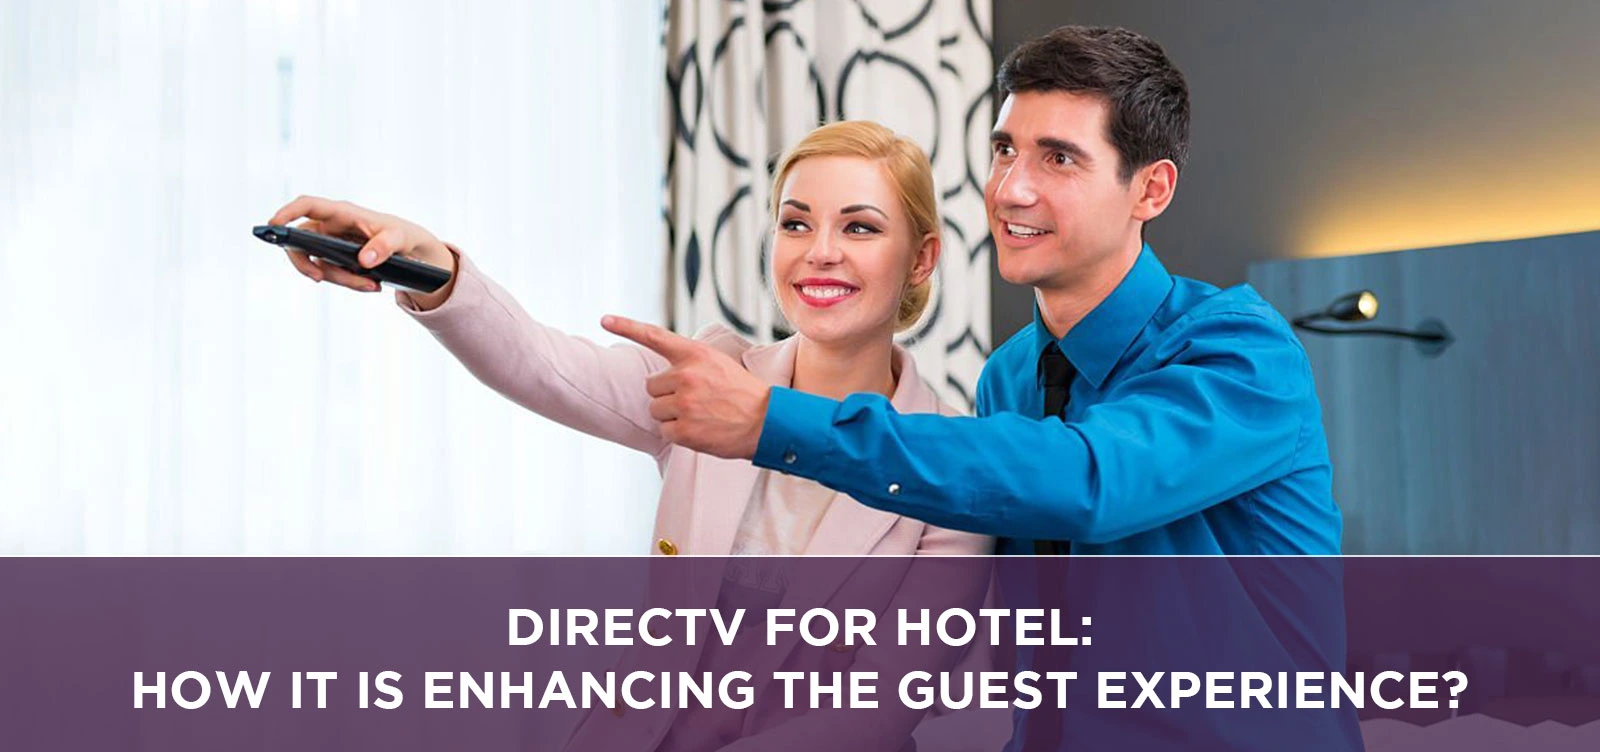 DIRECTV for Hotel: How it is Enhancing the Guest Experience?